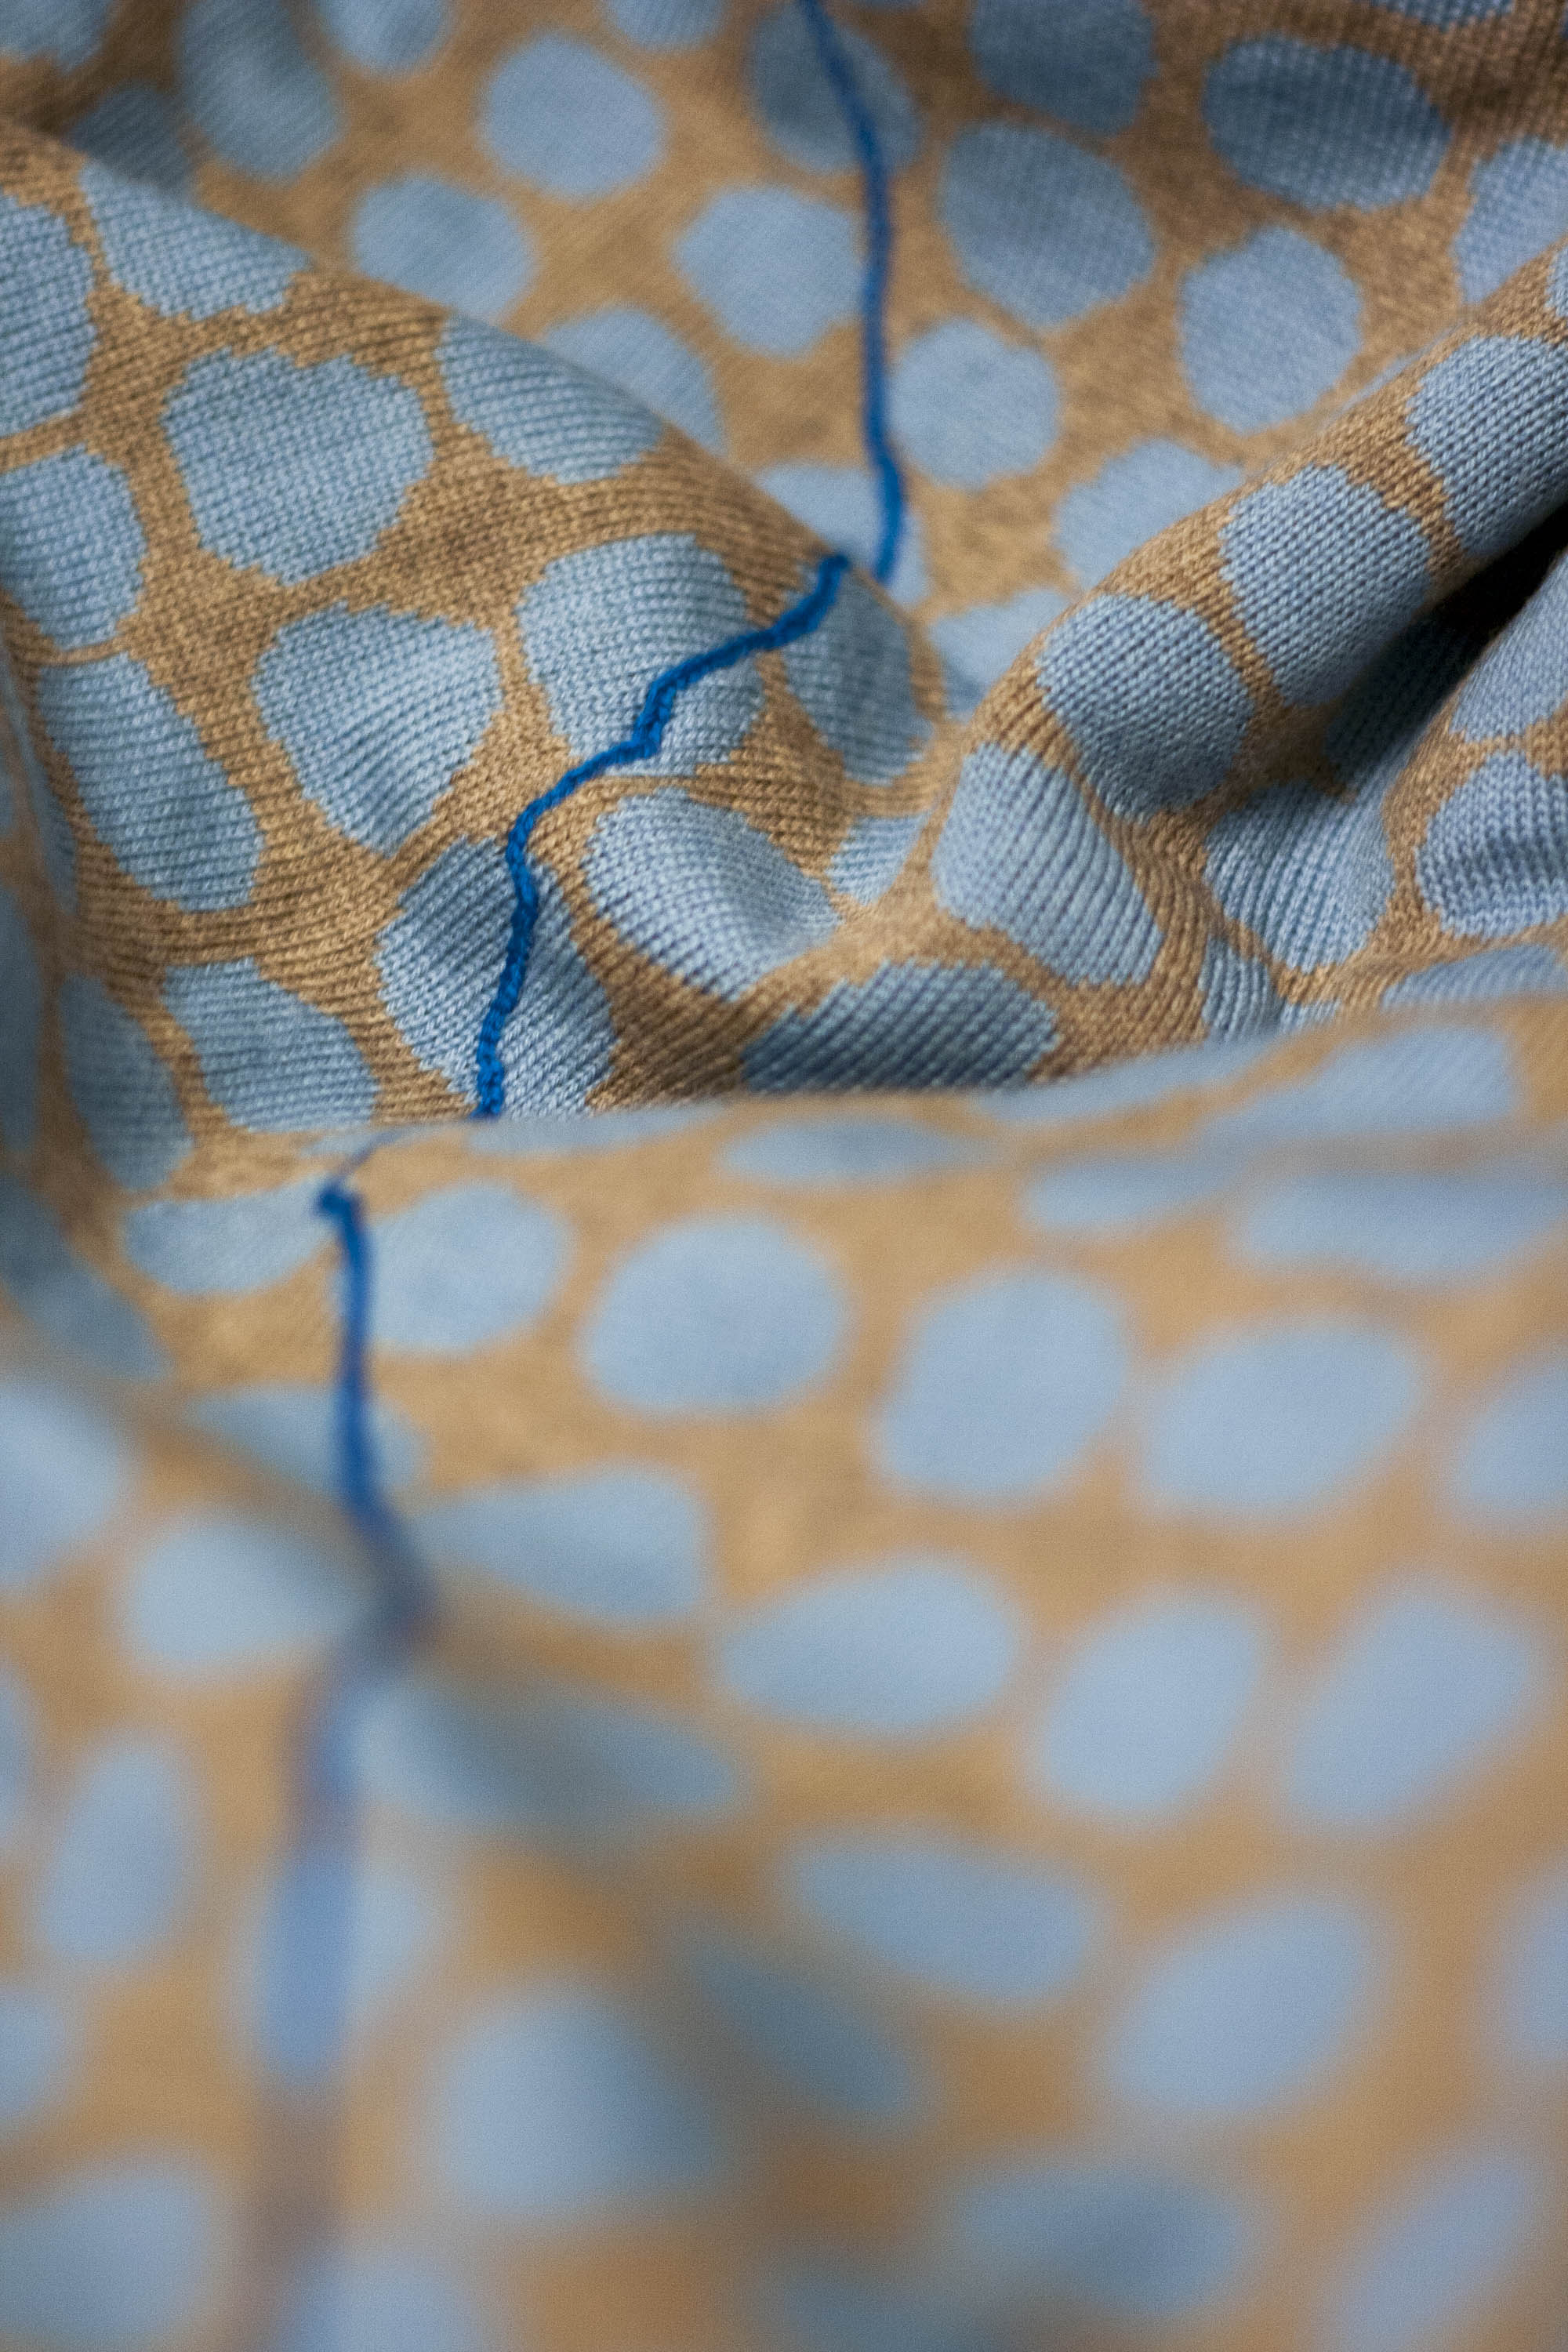 Detail of Ebb-stanes triangle jumper, knit in extra-fine merino. Shown in gold and light sky blue, with a royal blue 'drawn' line wandering over the fabric.